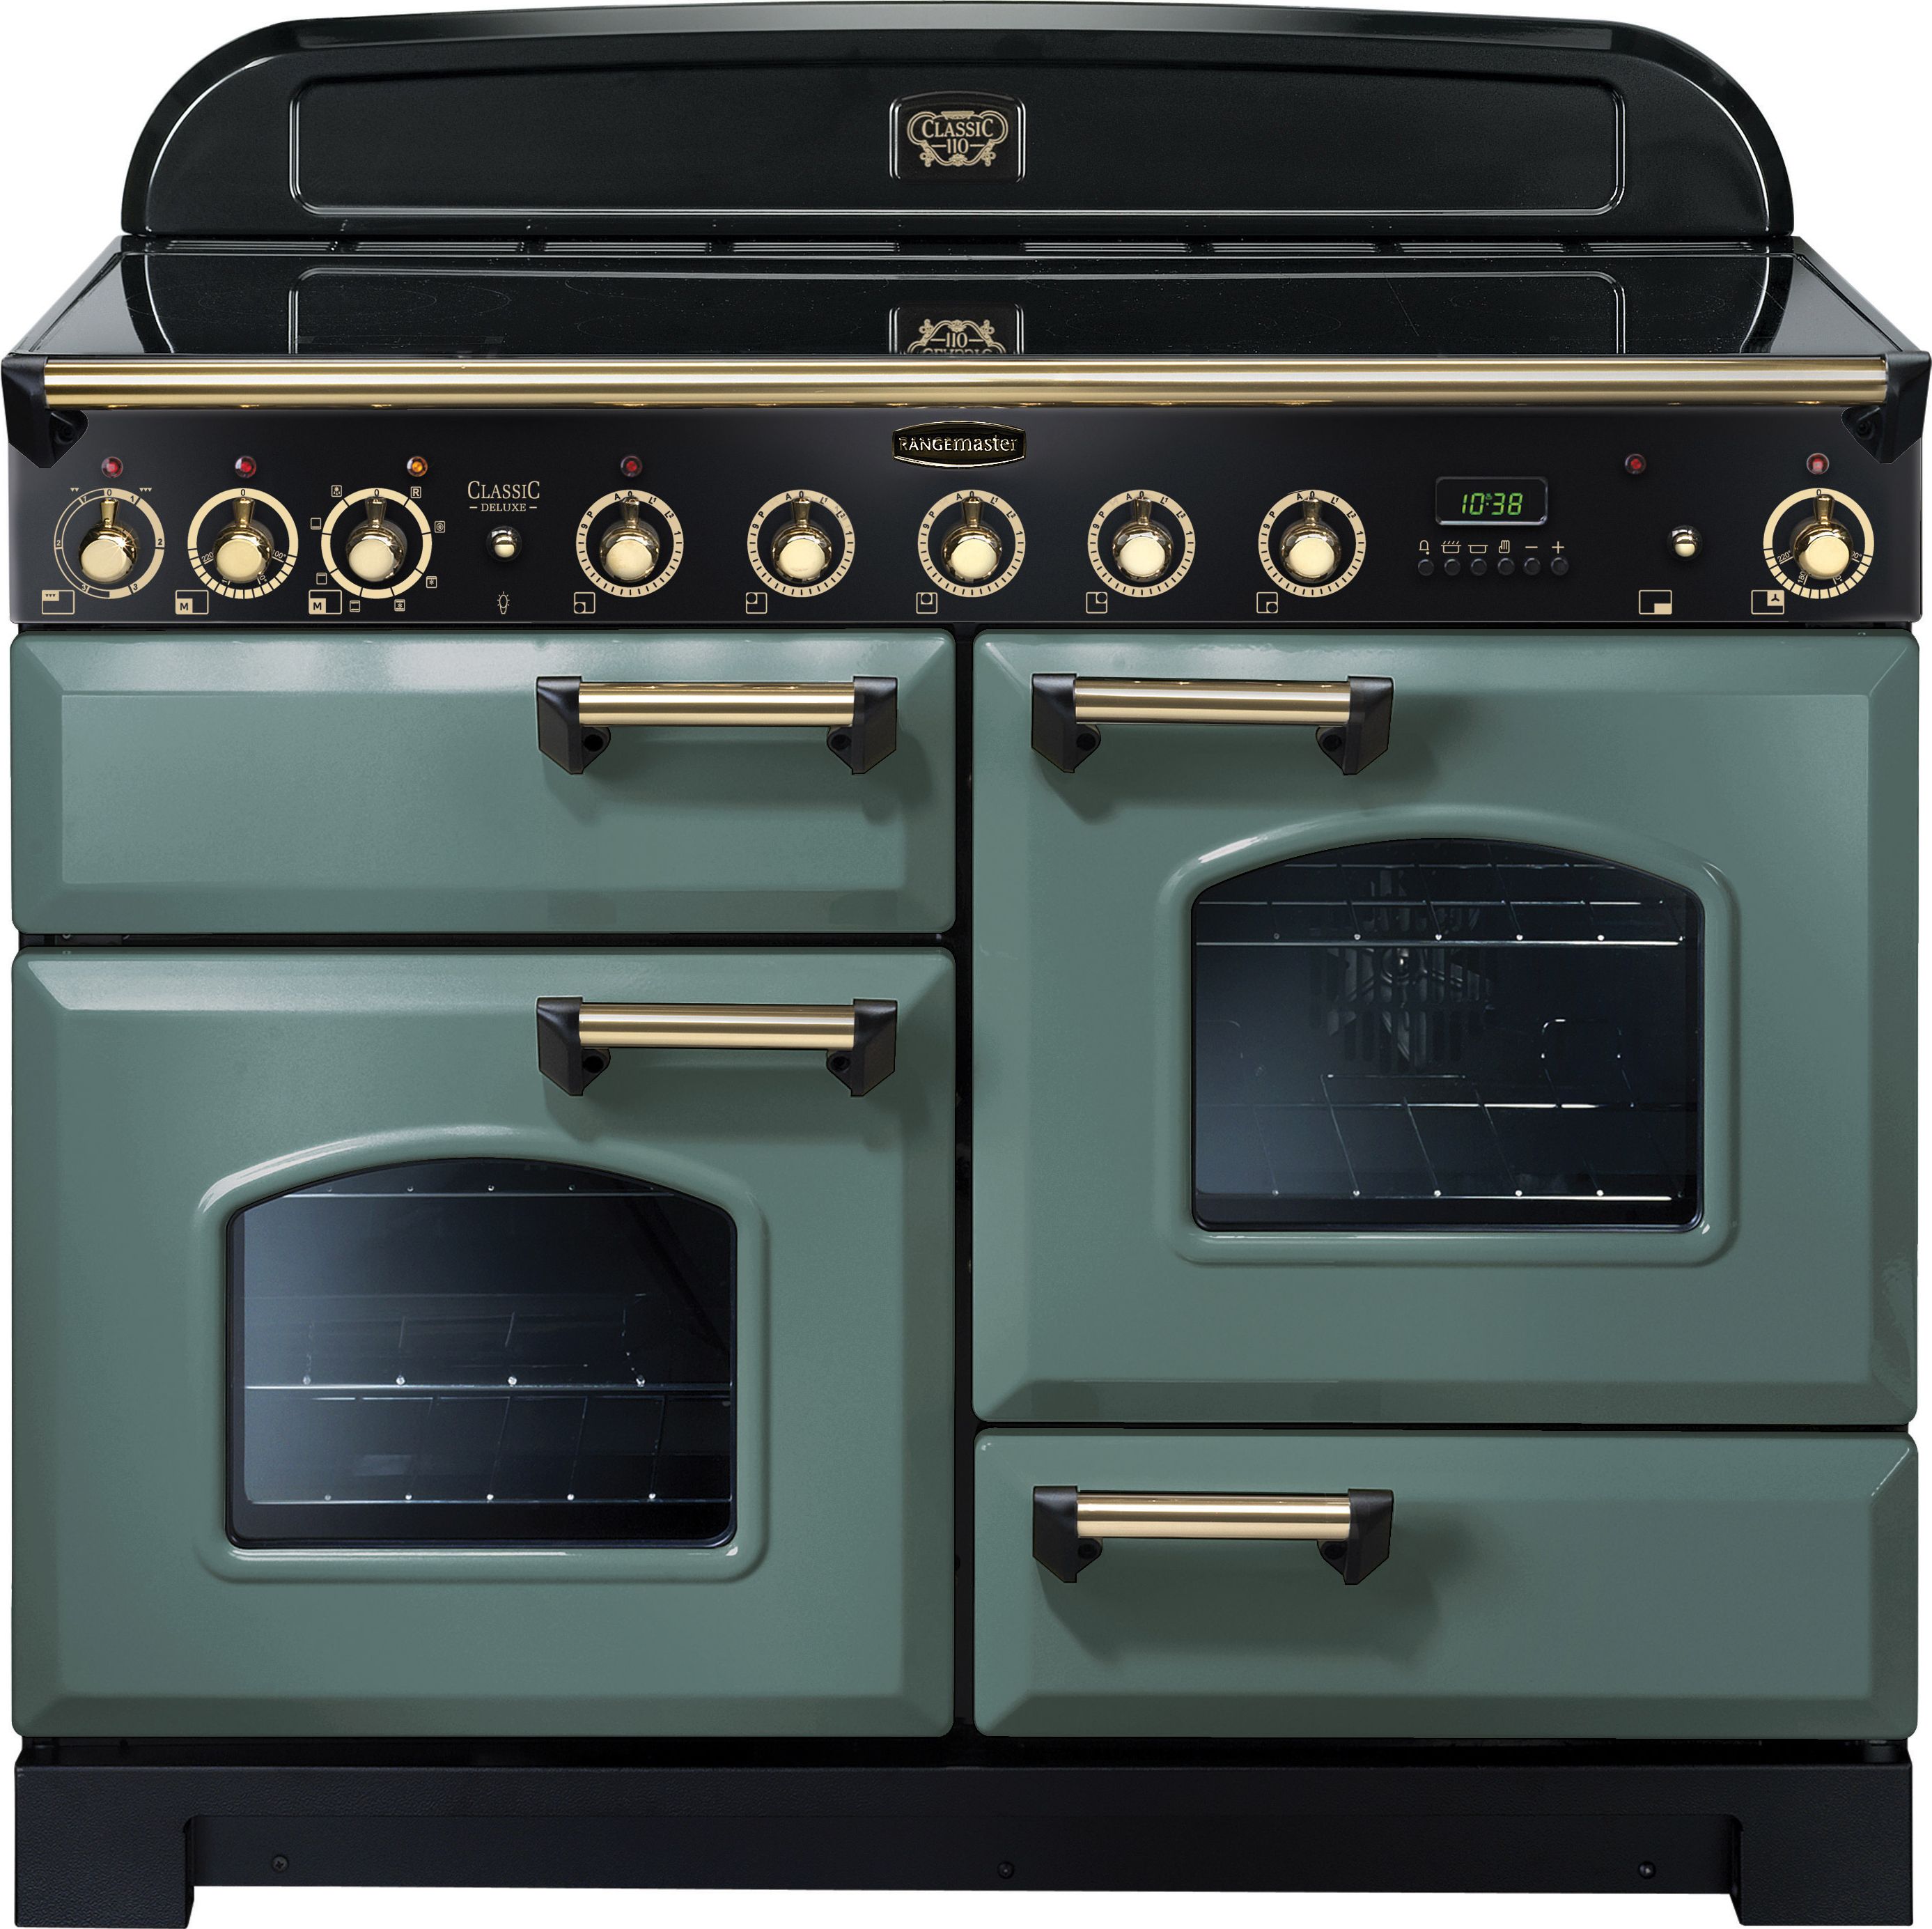 Rangemaster Classic Deluxe CDL110EIMG/B 110cm Electric Range Cooker with Induction Hob - Mineral Green / Brass - A/A Rated, Green